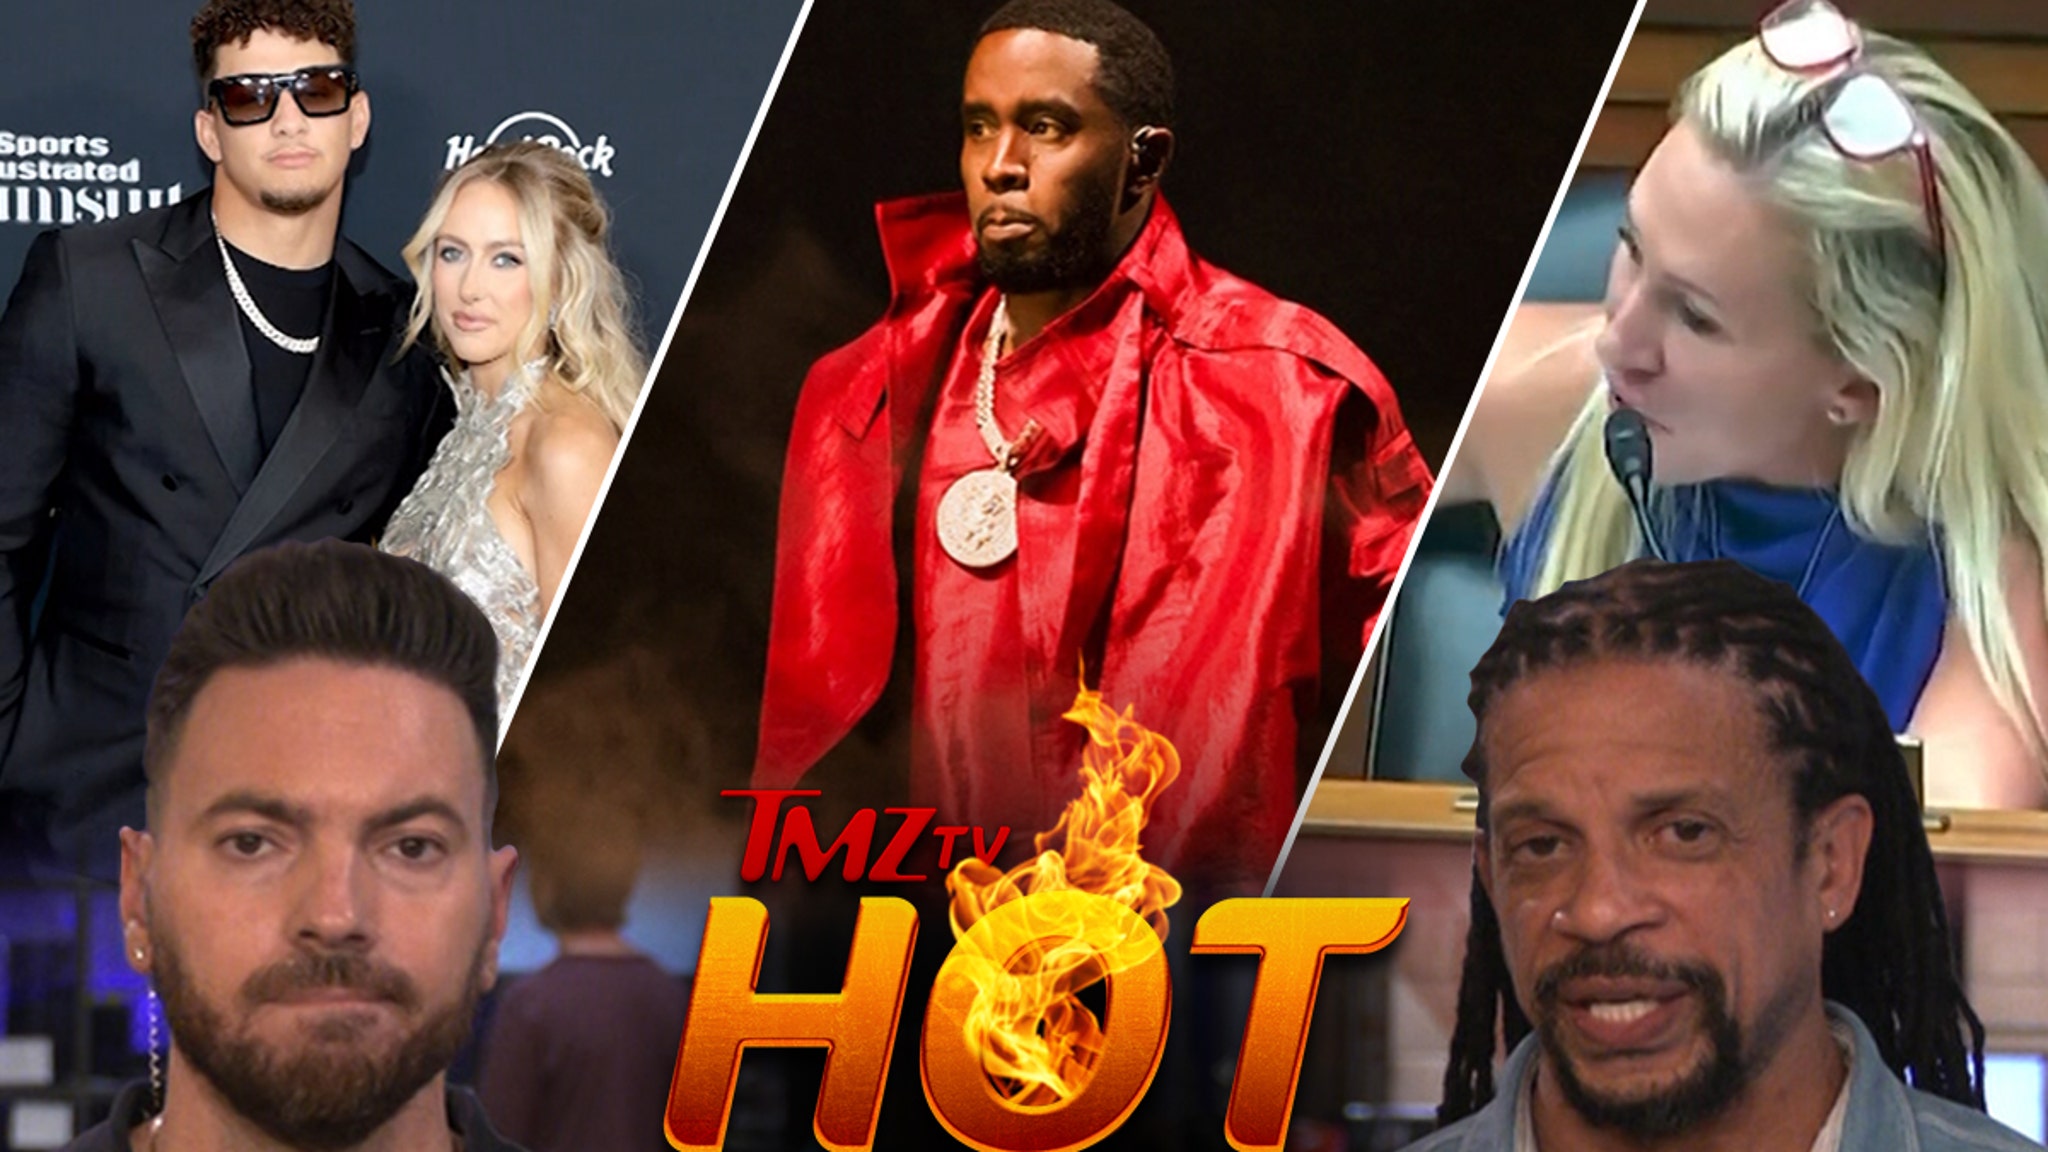 TMZ TV Hot Takes: Diddy Assault Video, Congress, Patrick and Brittany Mahomes